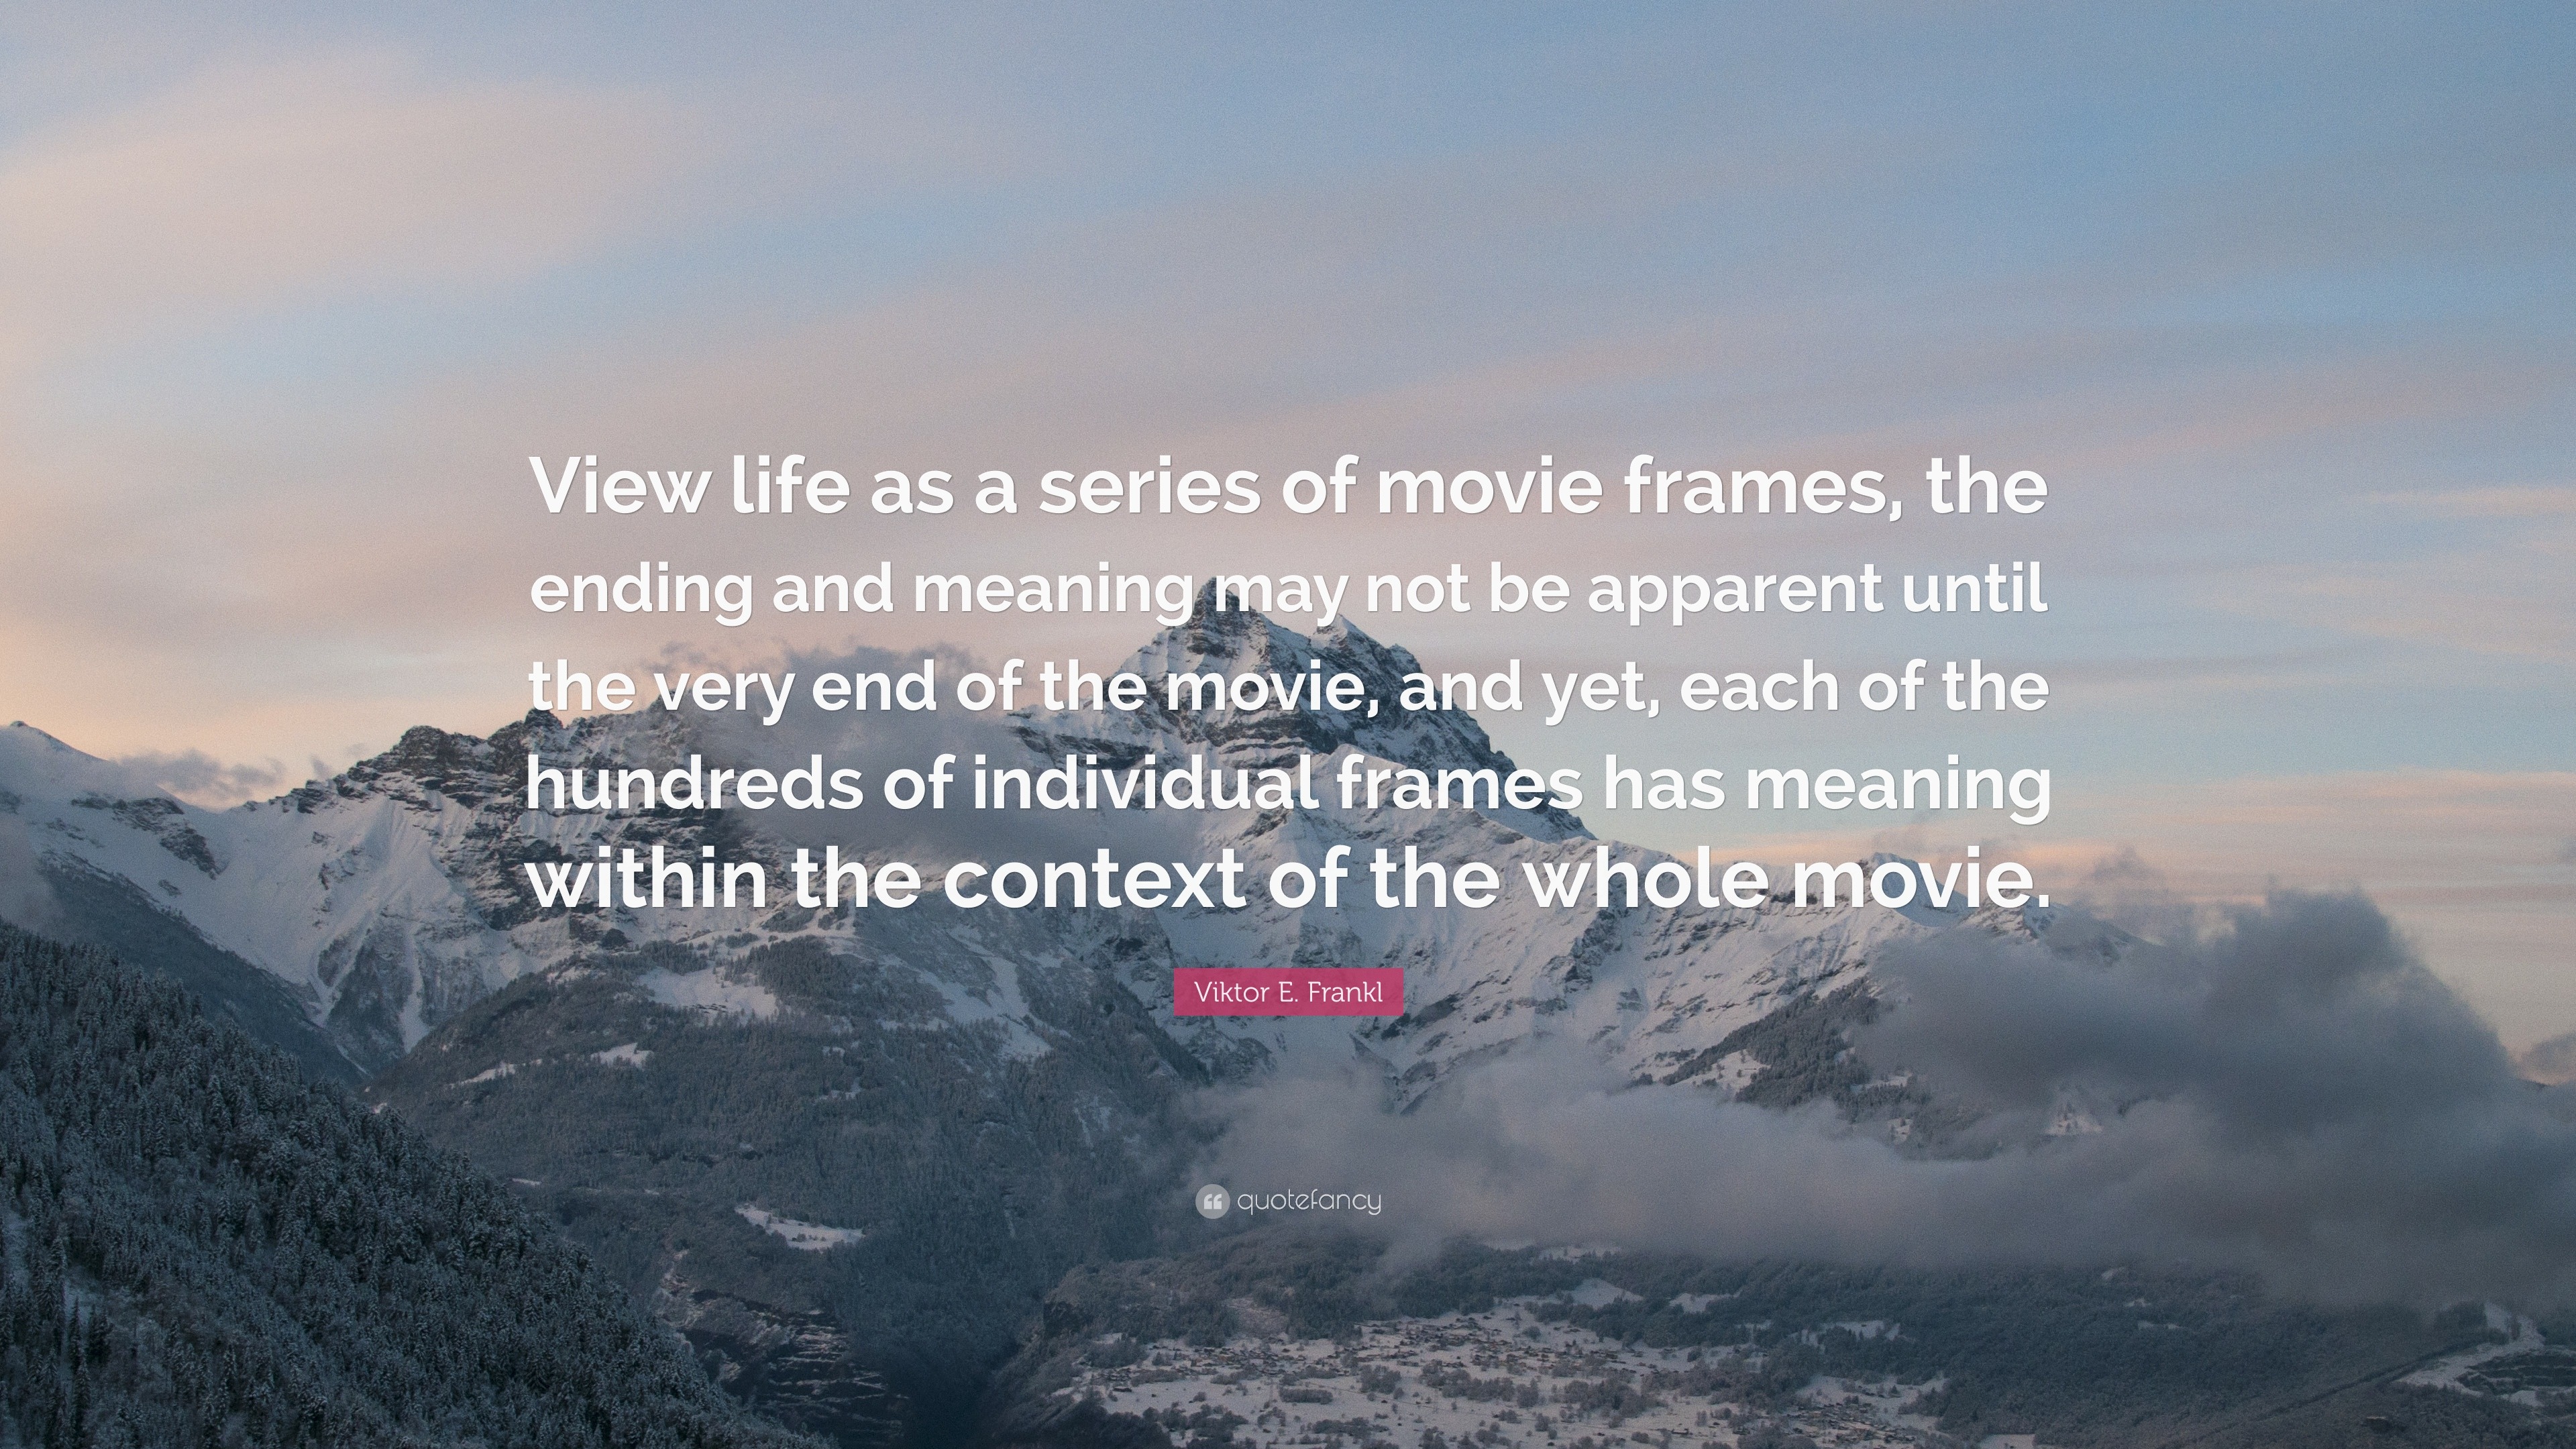 Viktor E Frankl Quote “View life as a series of movie frames